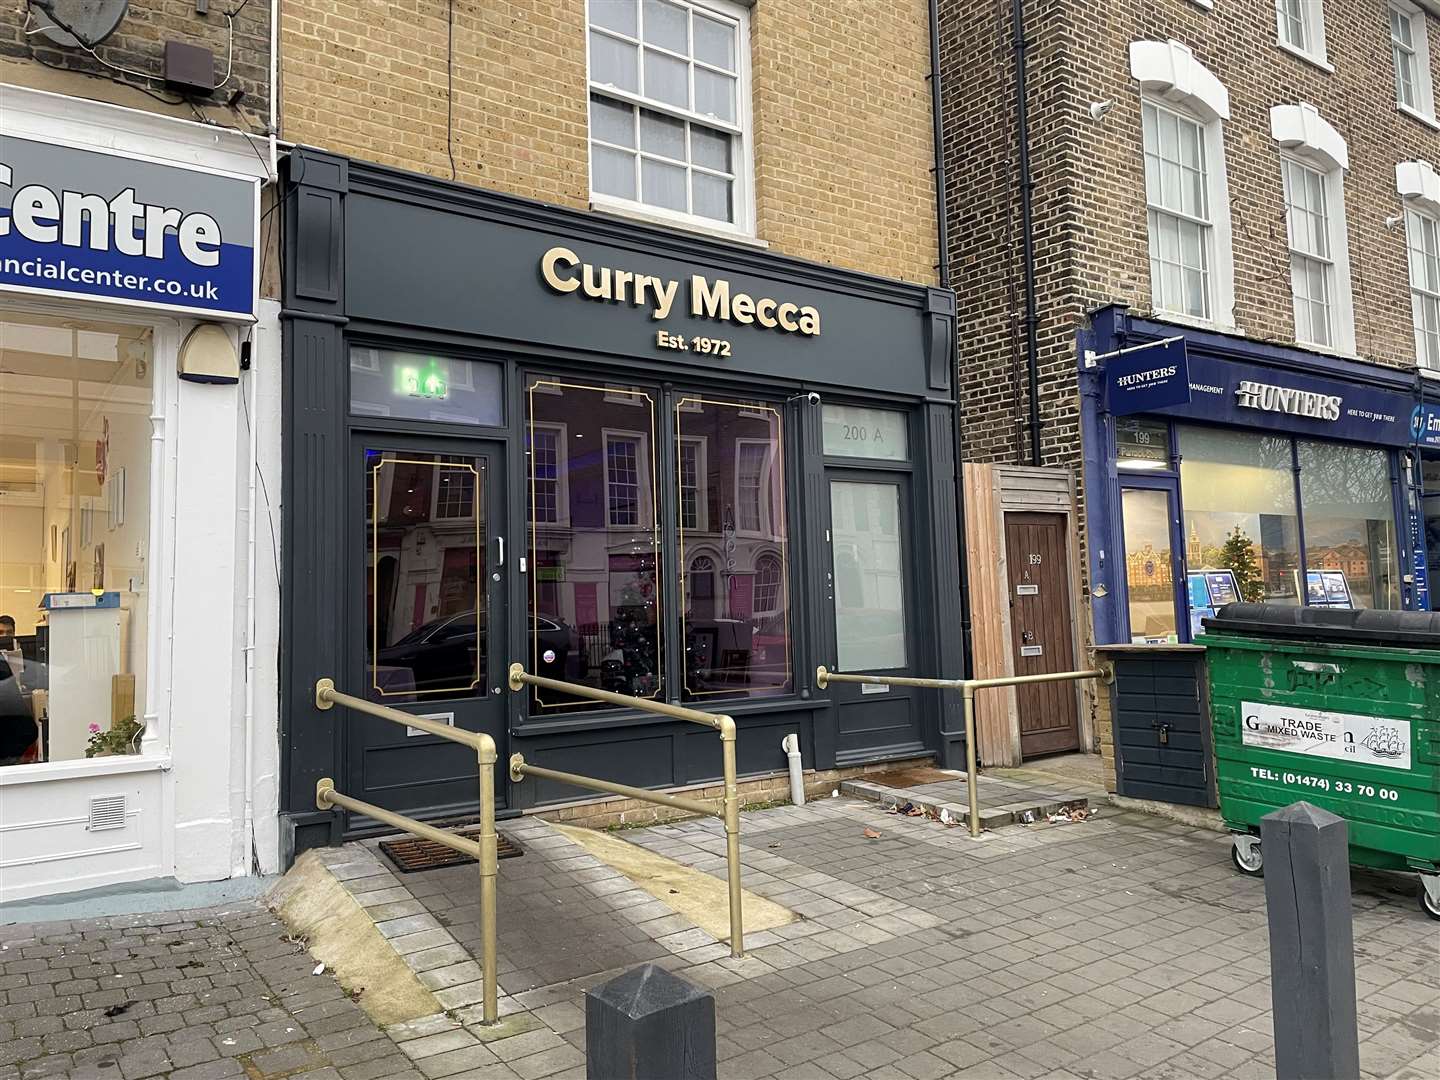 Curry Mecca was named the Best Indian Restaurant in Kent